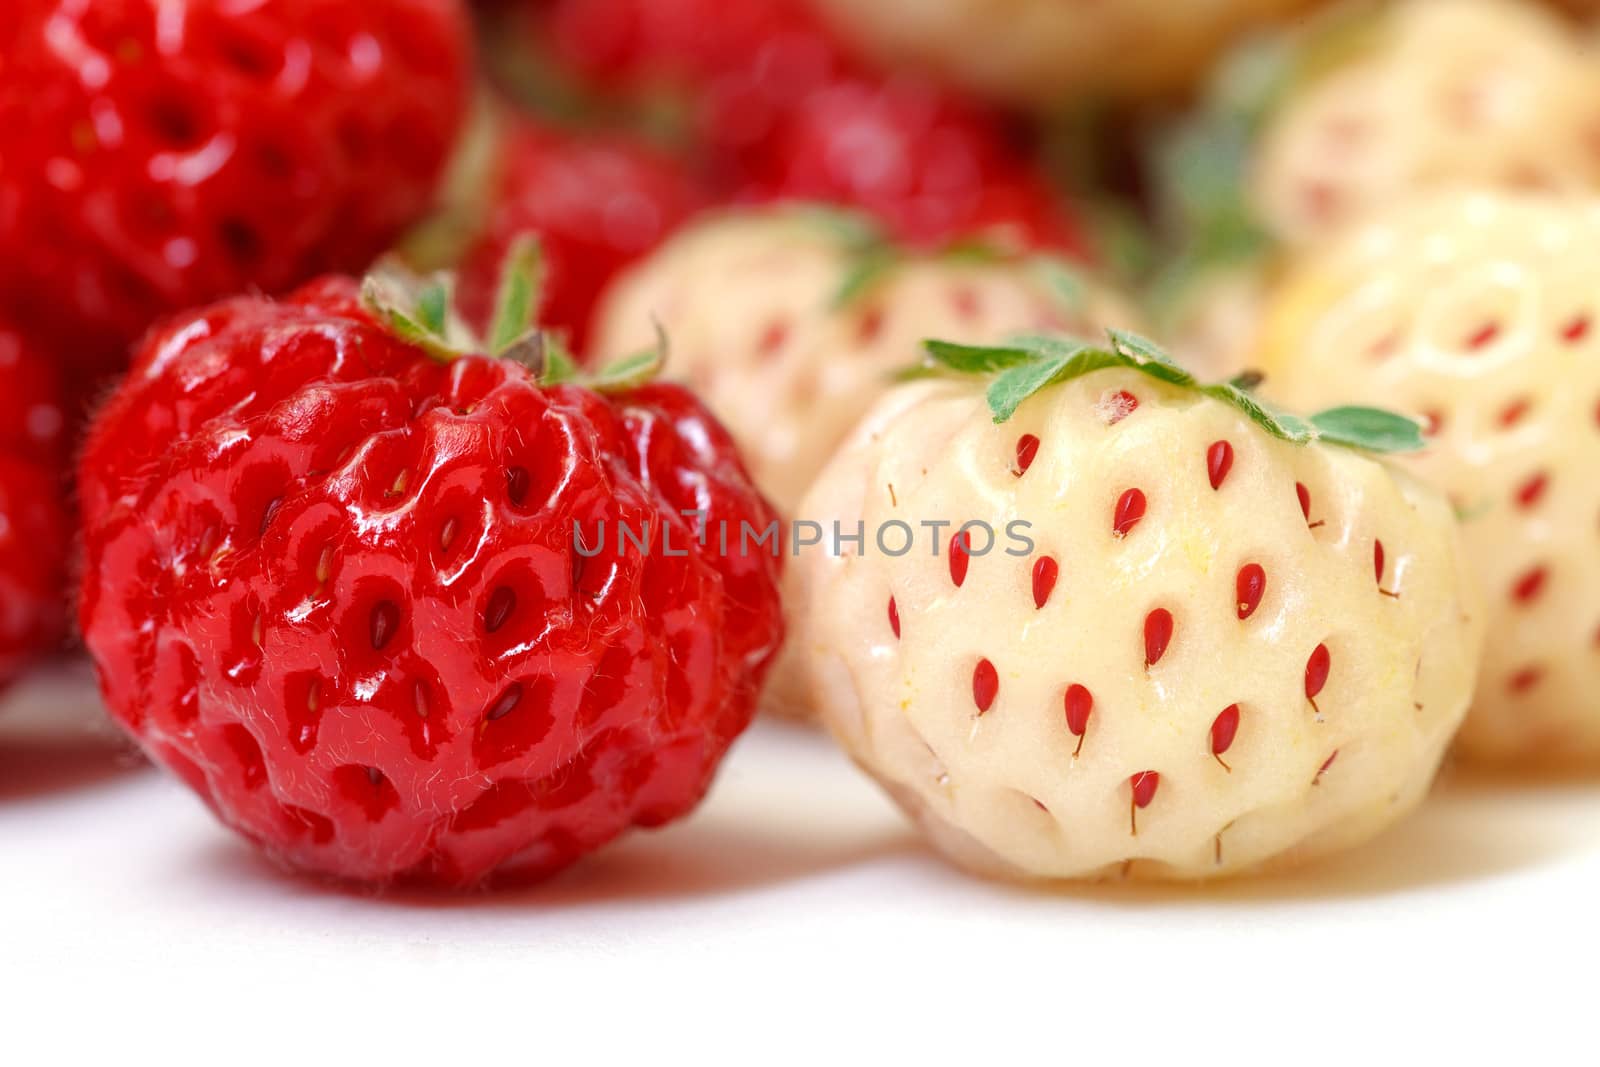 Ripe White and Red Strawberries by Discovod